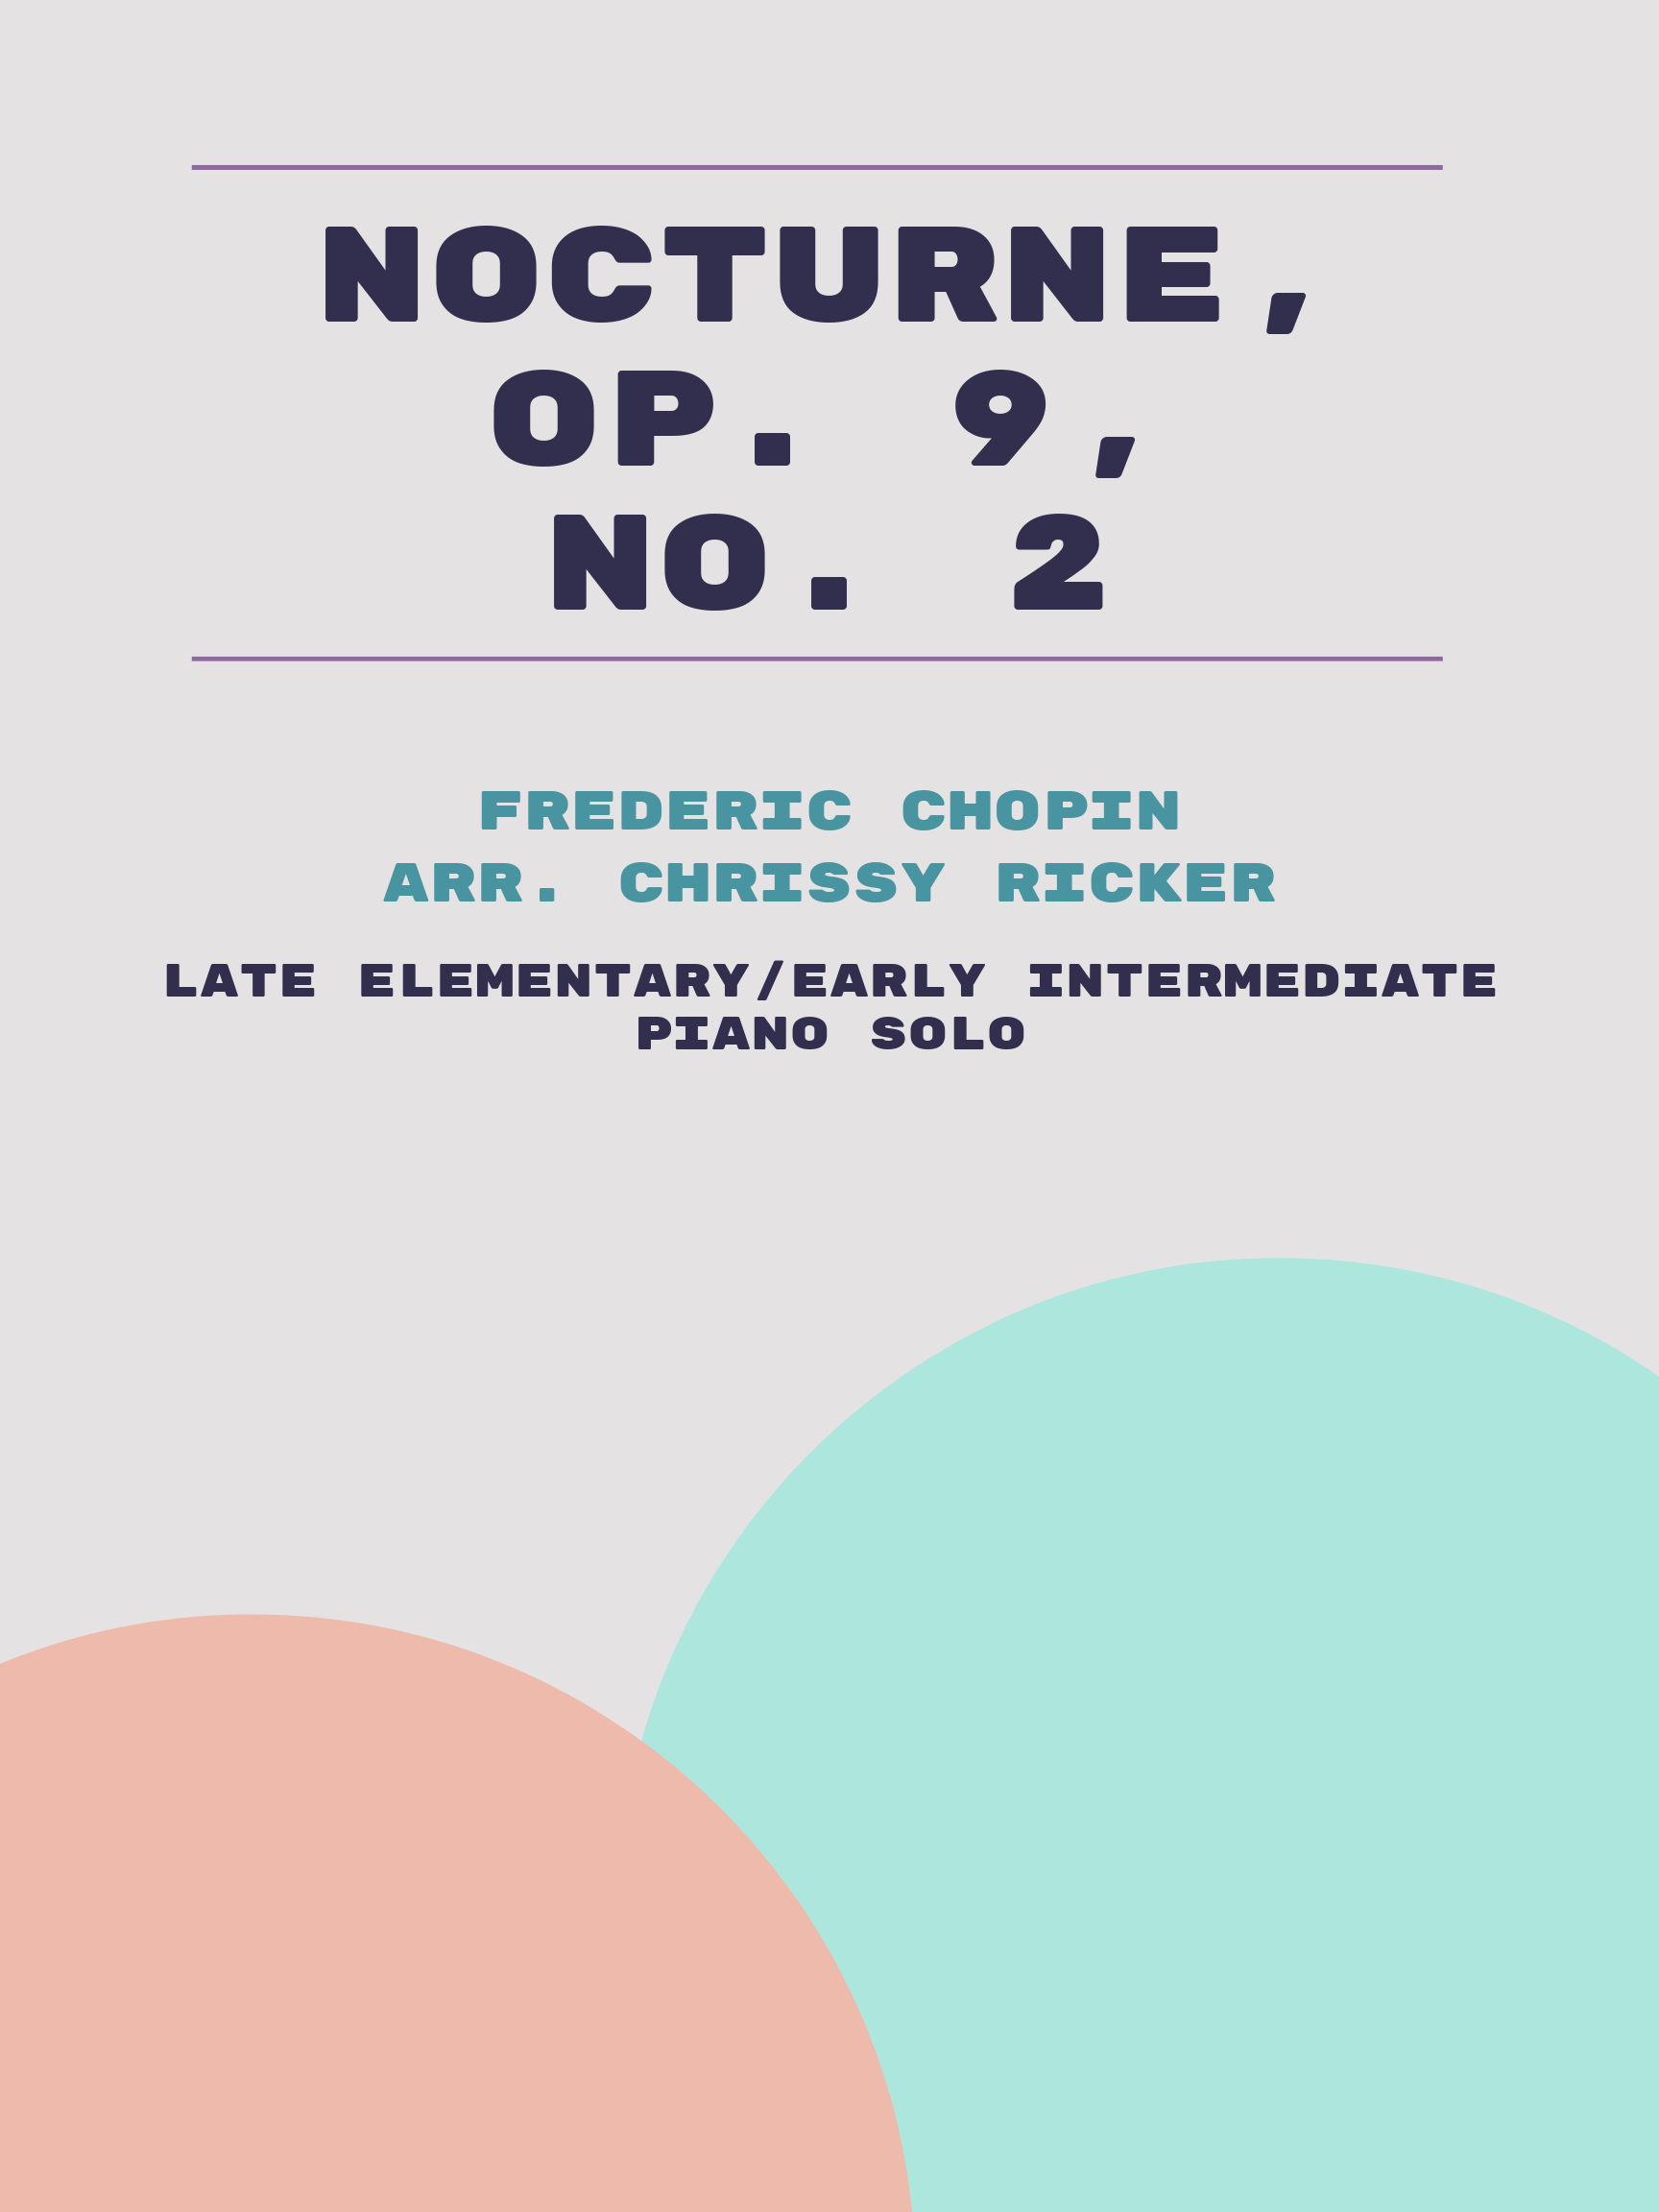 Nocturne, Op. 9, No. 2 by Frederic Chopin